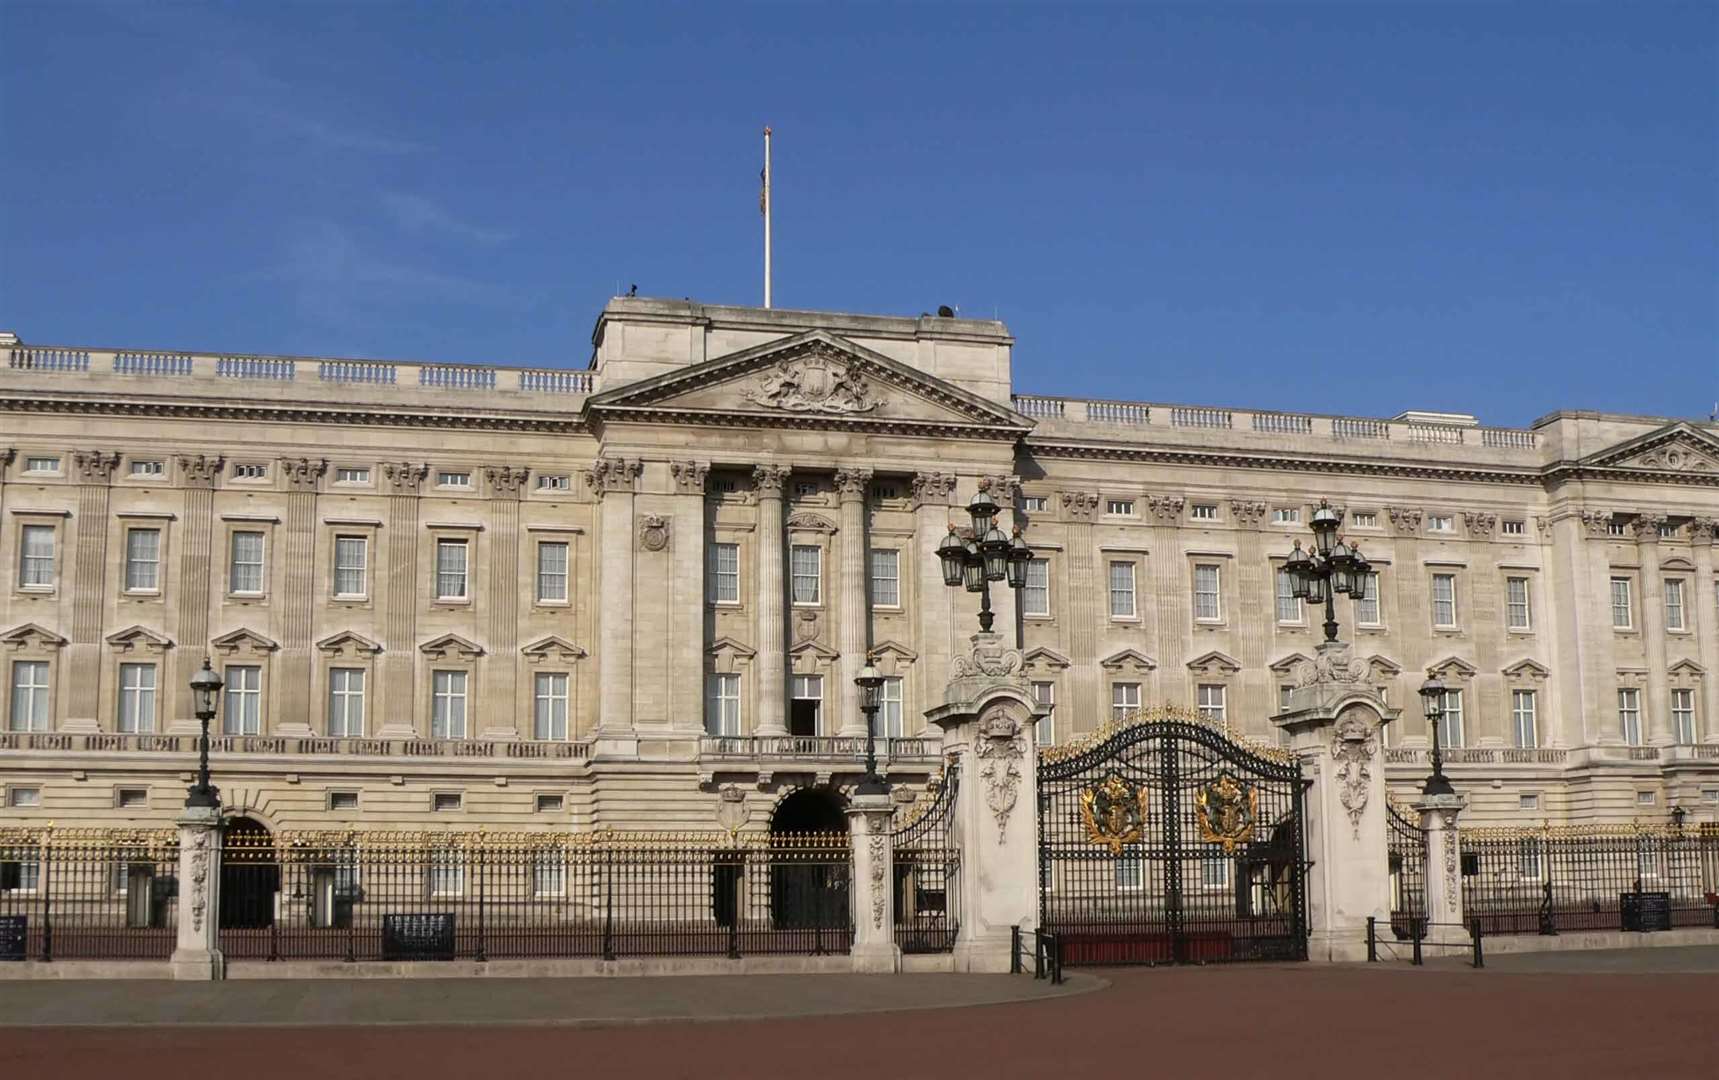 Buckingham Palace was built, in part at least, using bricks made in Kent